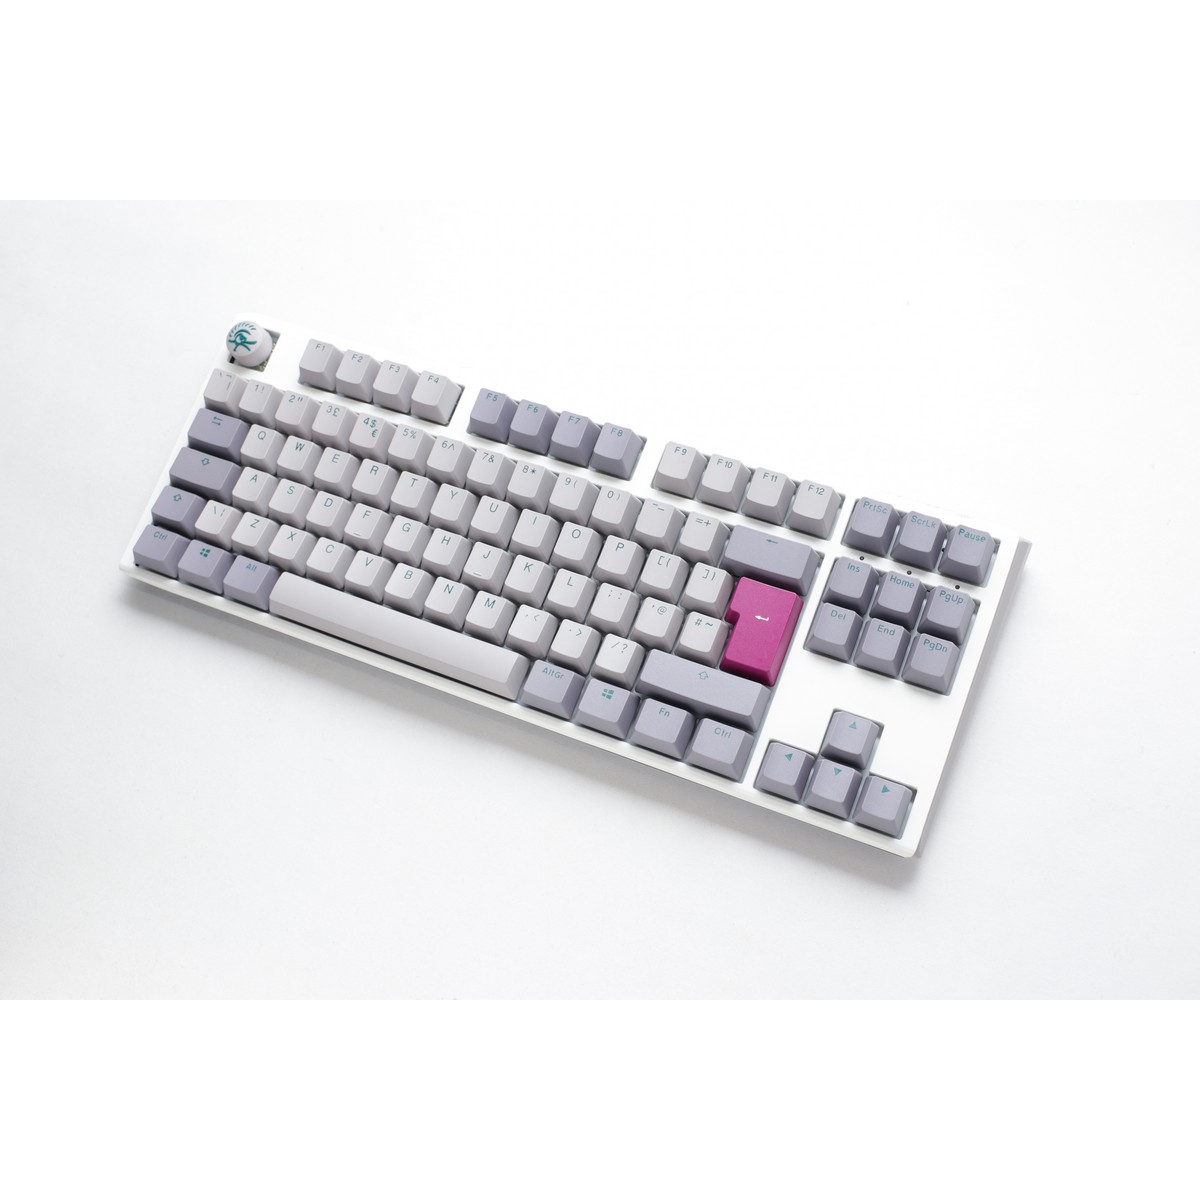 Ducky - Ducky One 3 Mist TKL 80% USB RGB Mechanical Gaming Keyboard Cherry MX Silent Red Switch - UK Layout